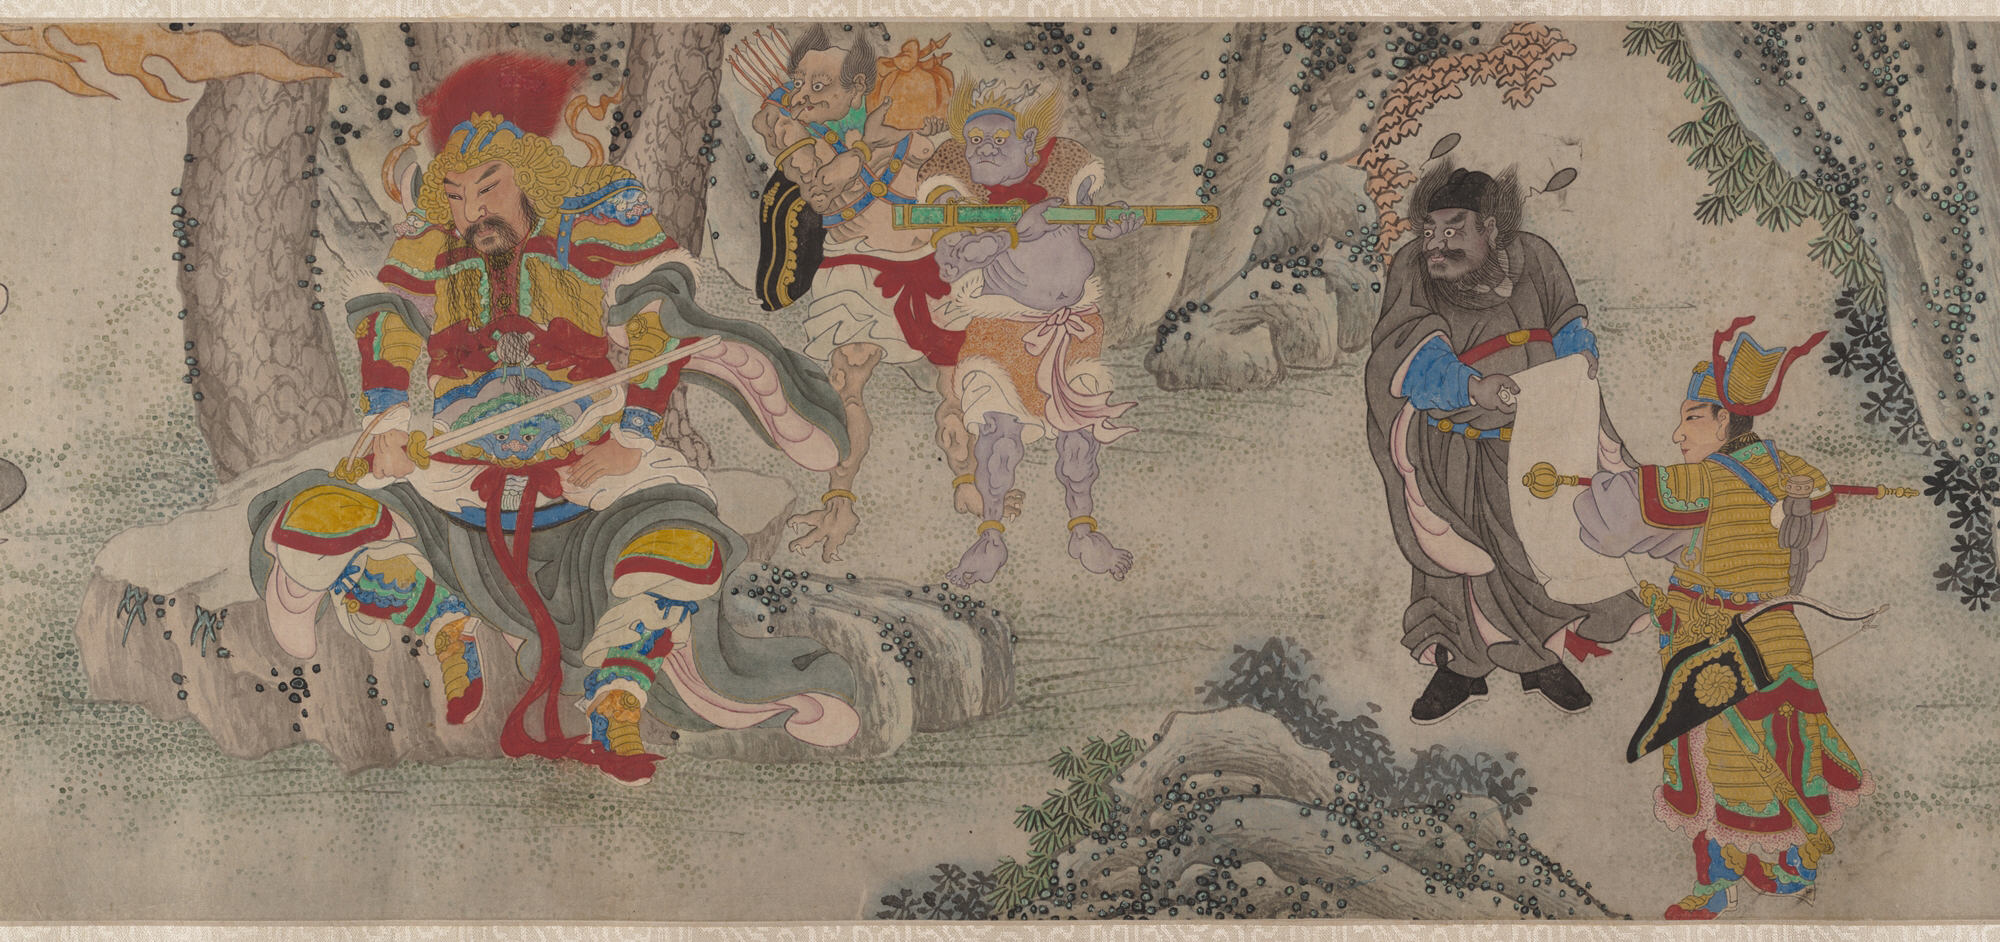 A scroll painting from the Song Dynasty depicting a mountain exorcism by Erlang, in color